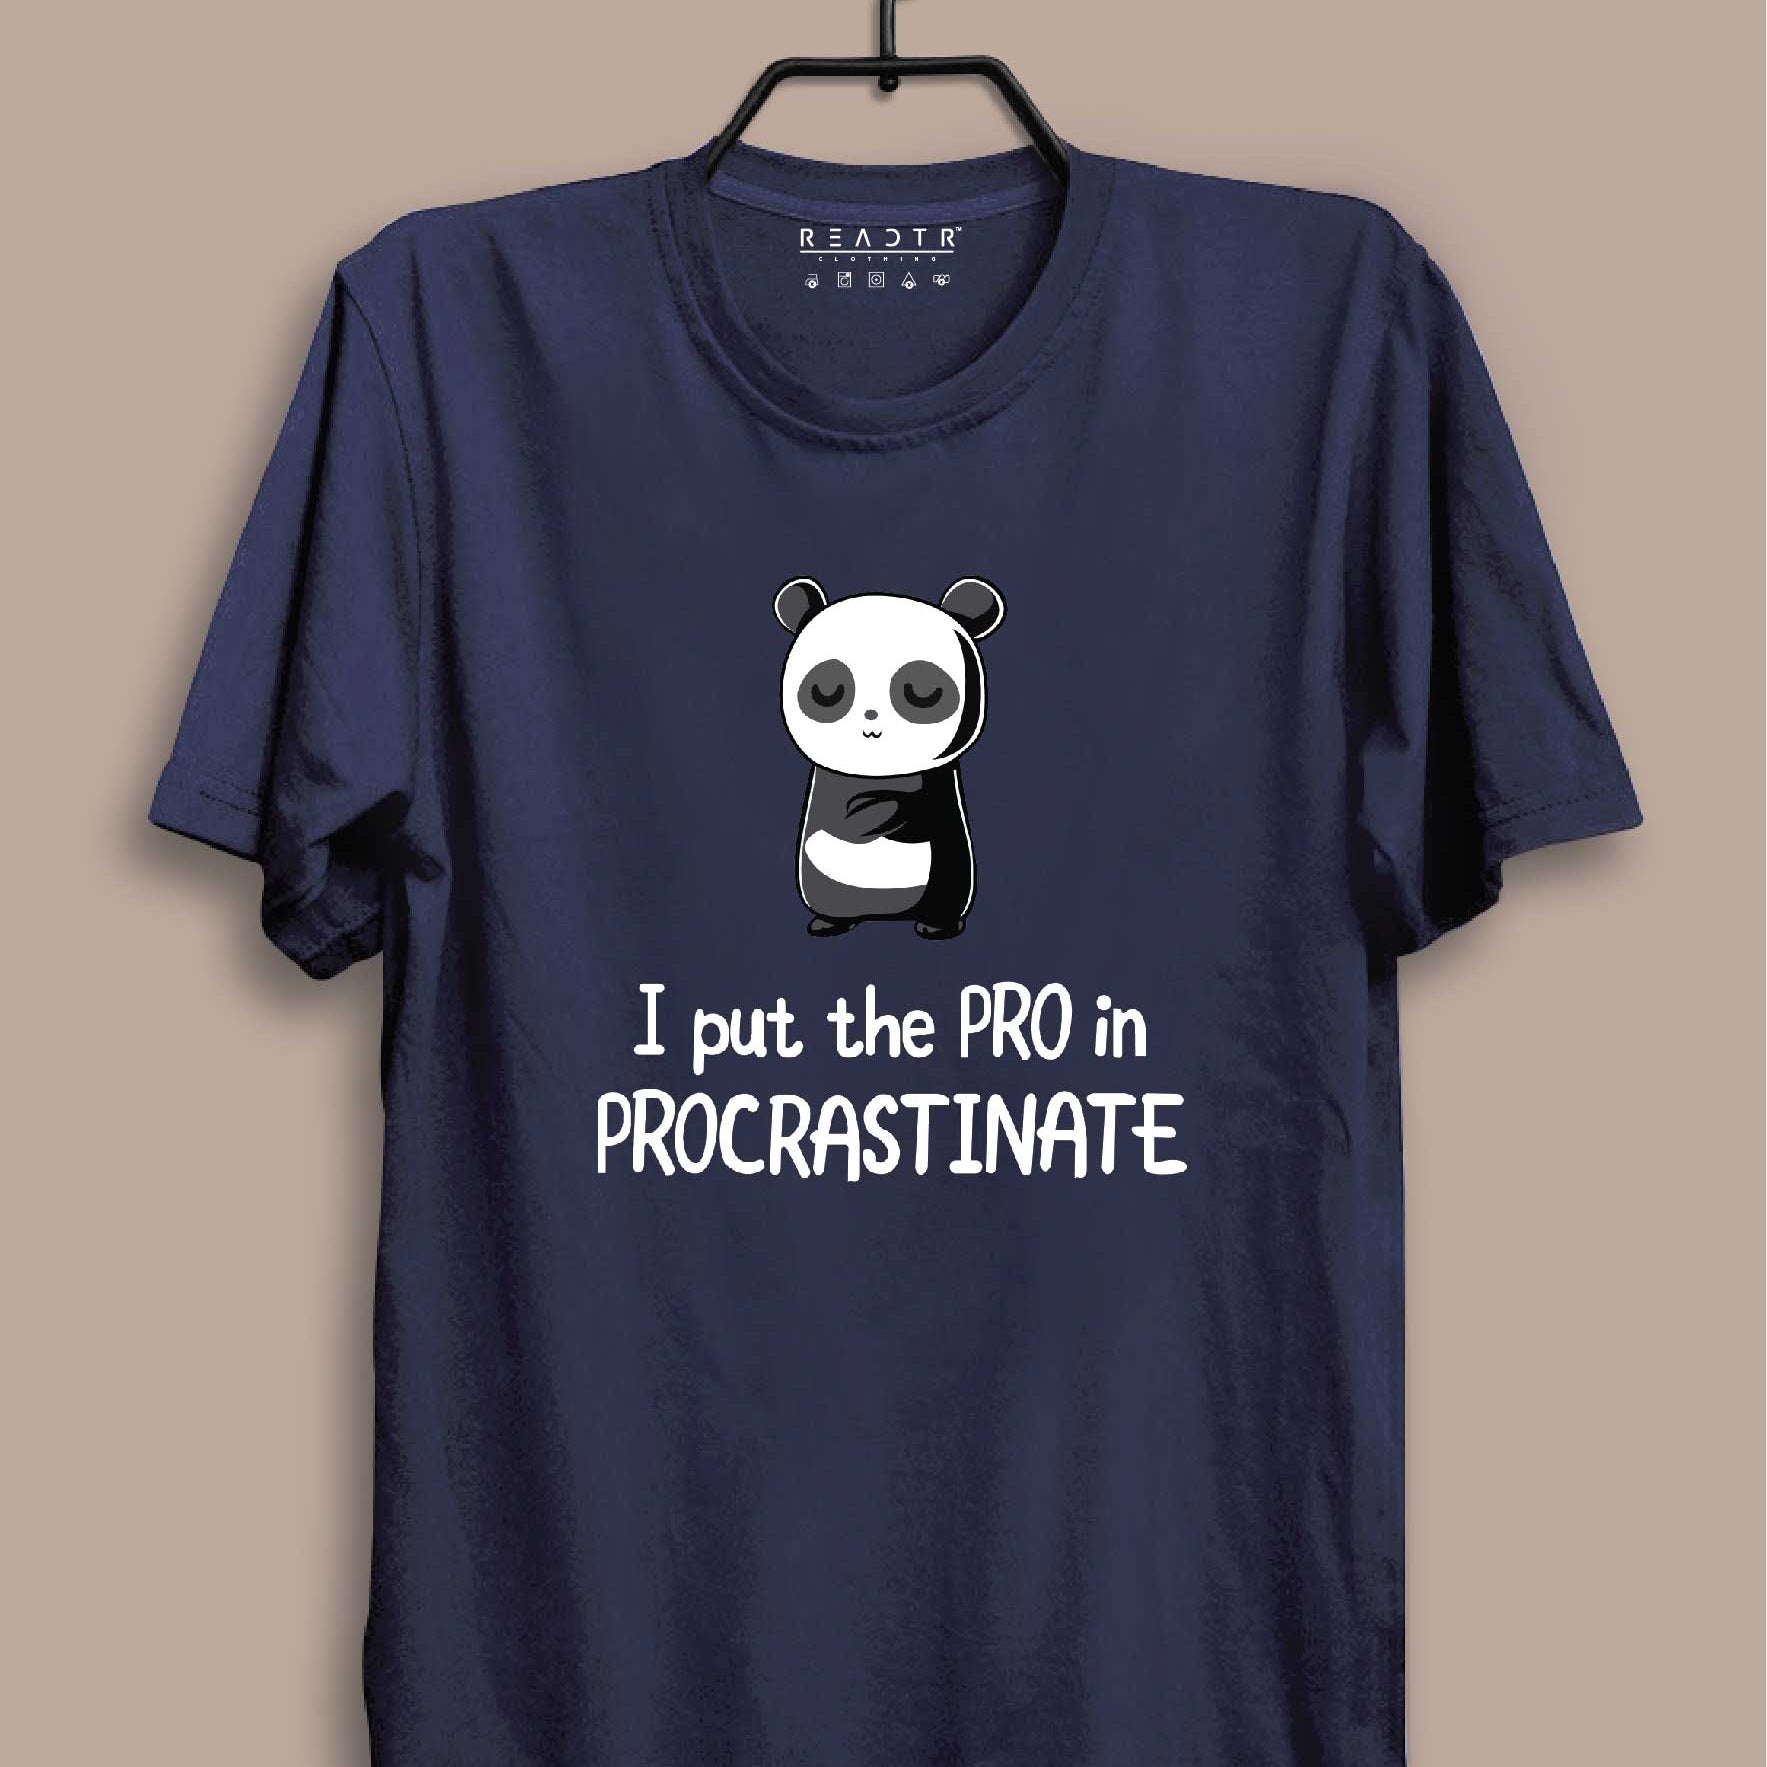 I Put the Pro in Procrastinate Reactr Tshirts For Men - Eyewearlabs